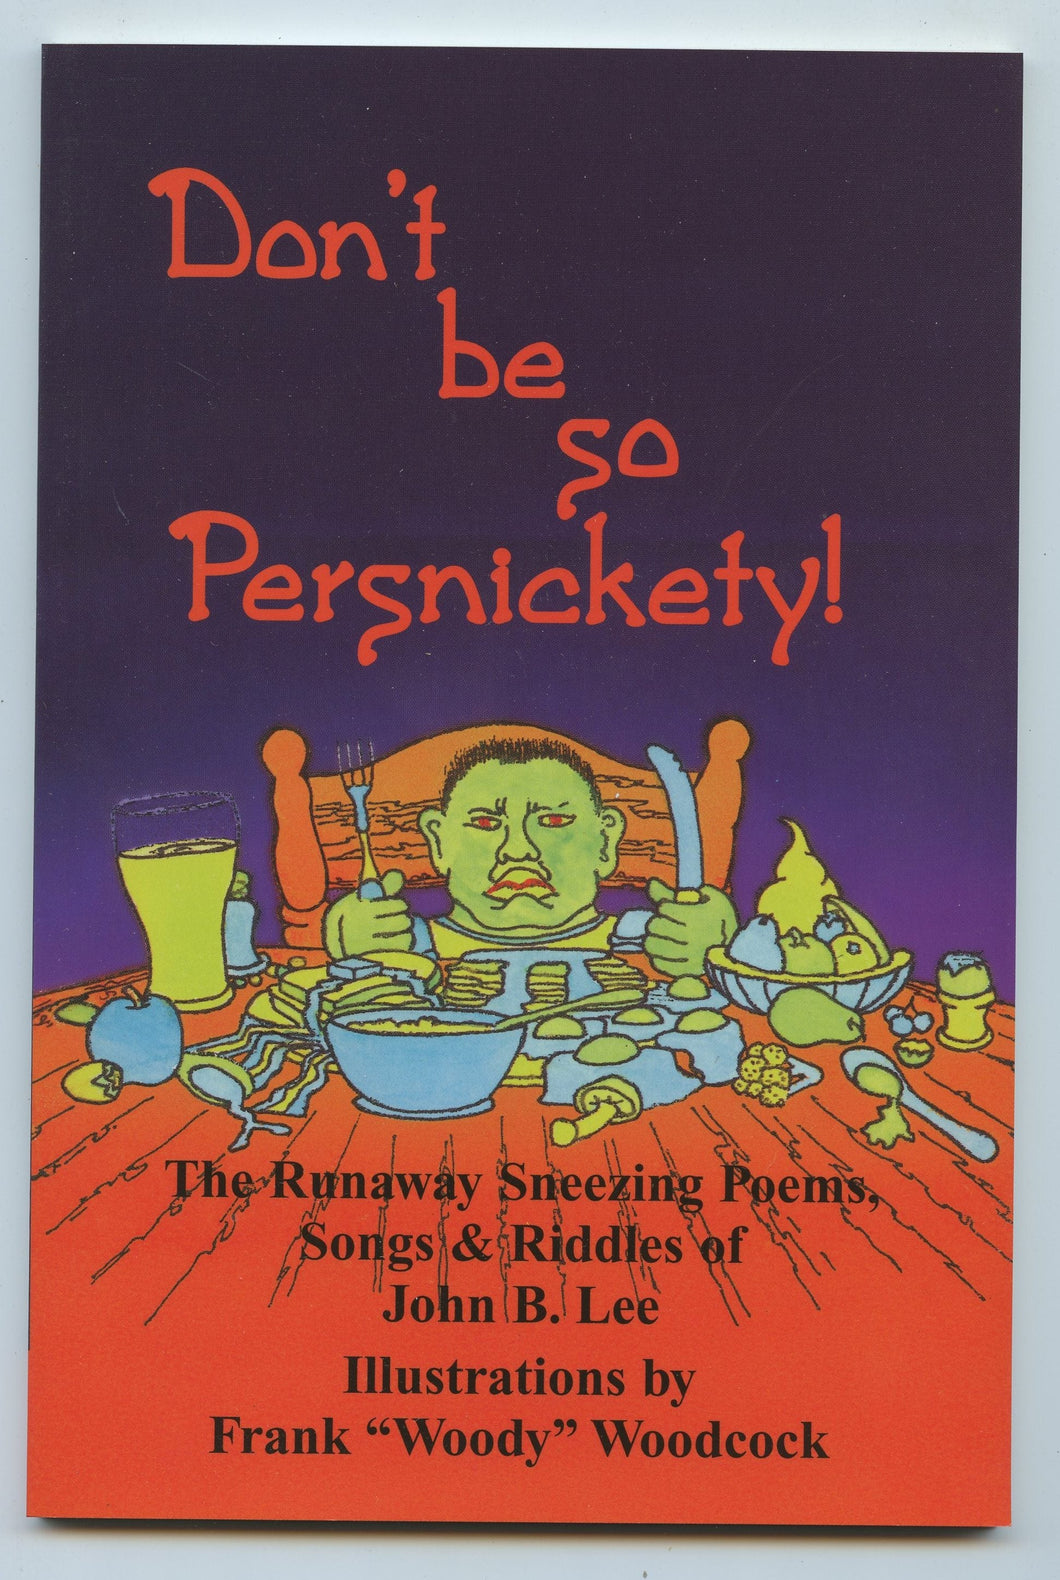 Don't be so Persnickety! The Runaway Sneezing Poems, Songs & Riddles of John B. Lee